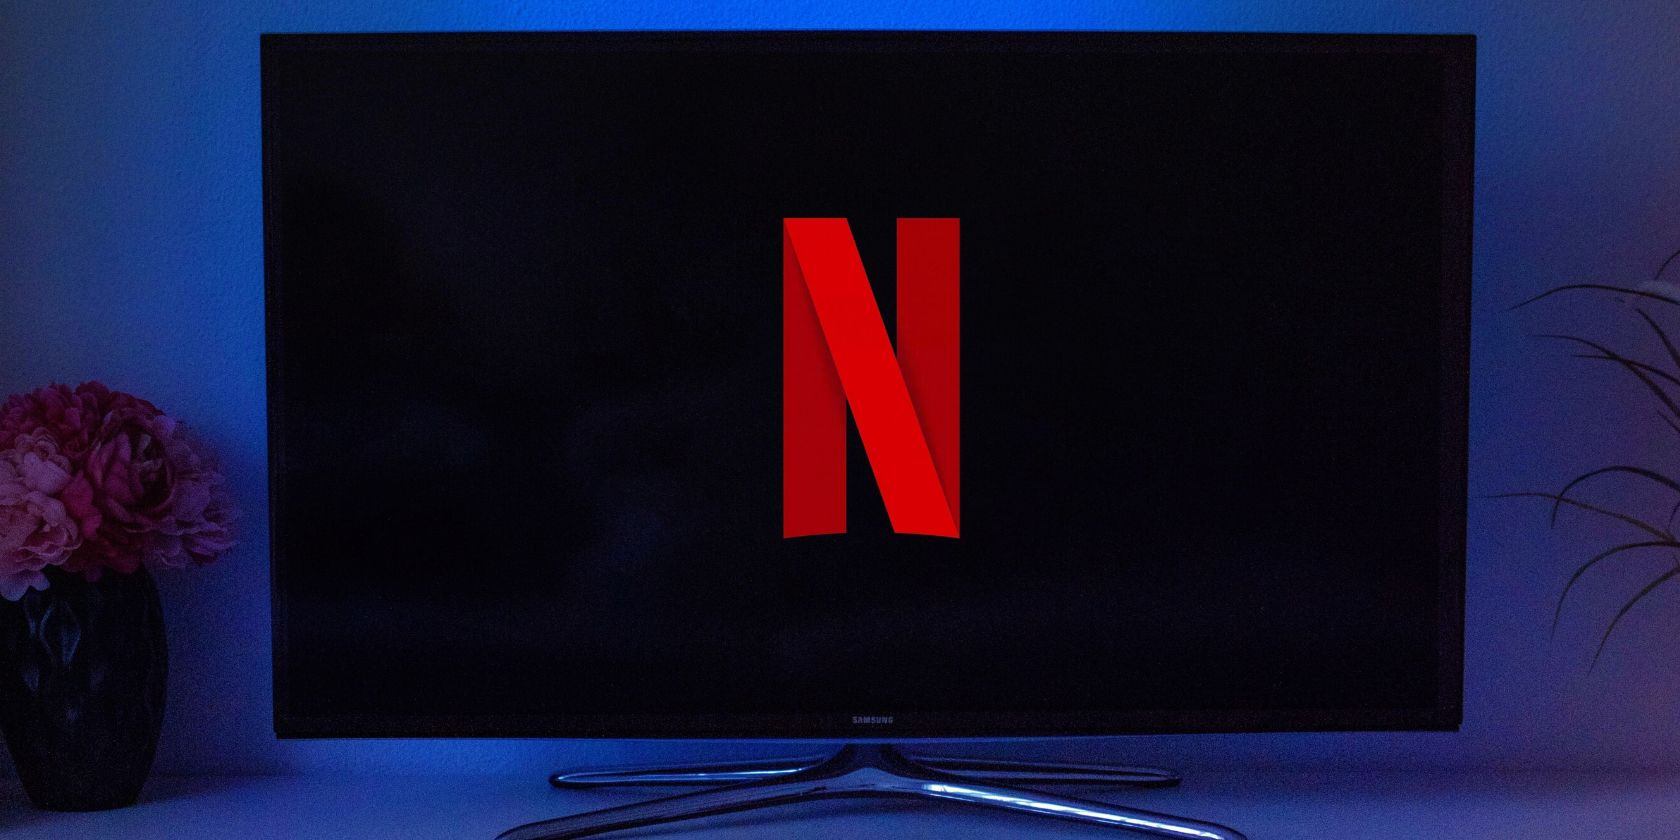 A close-up of a TV screen displaying the Netflix logo